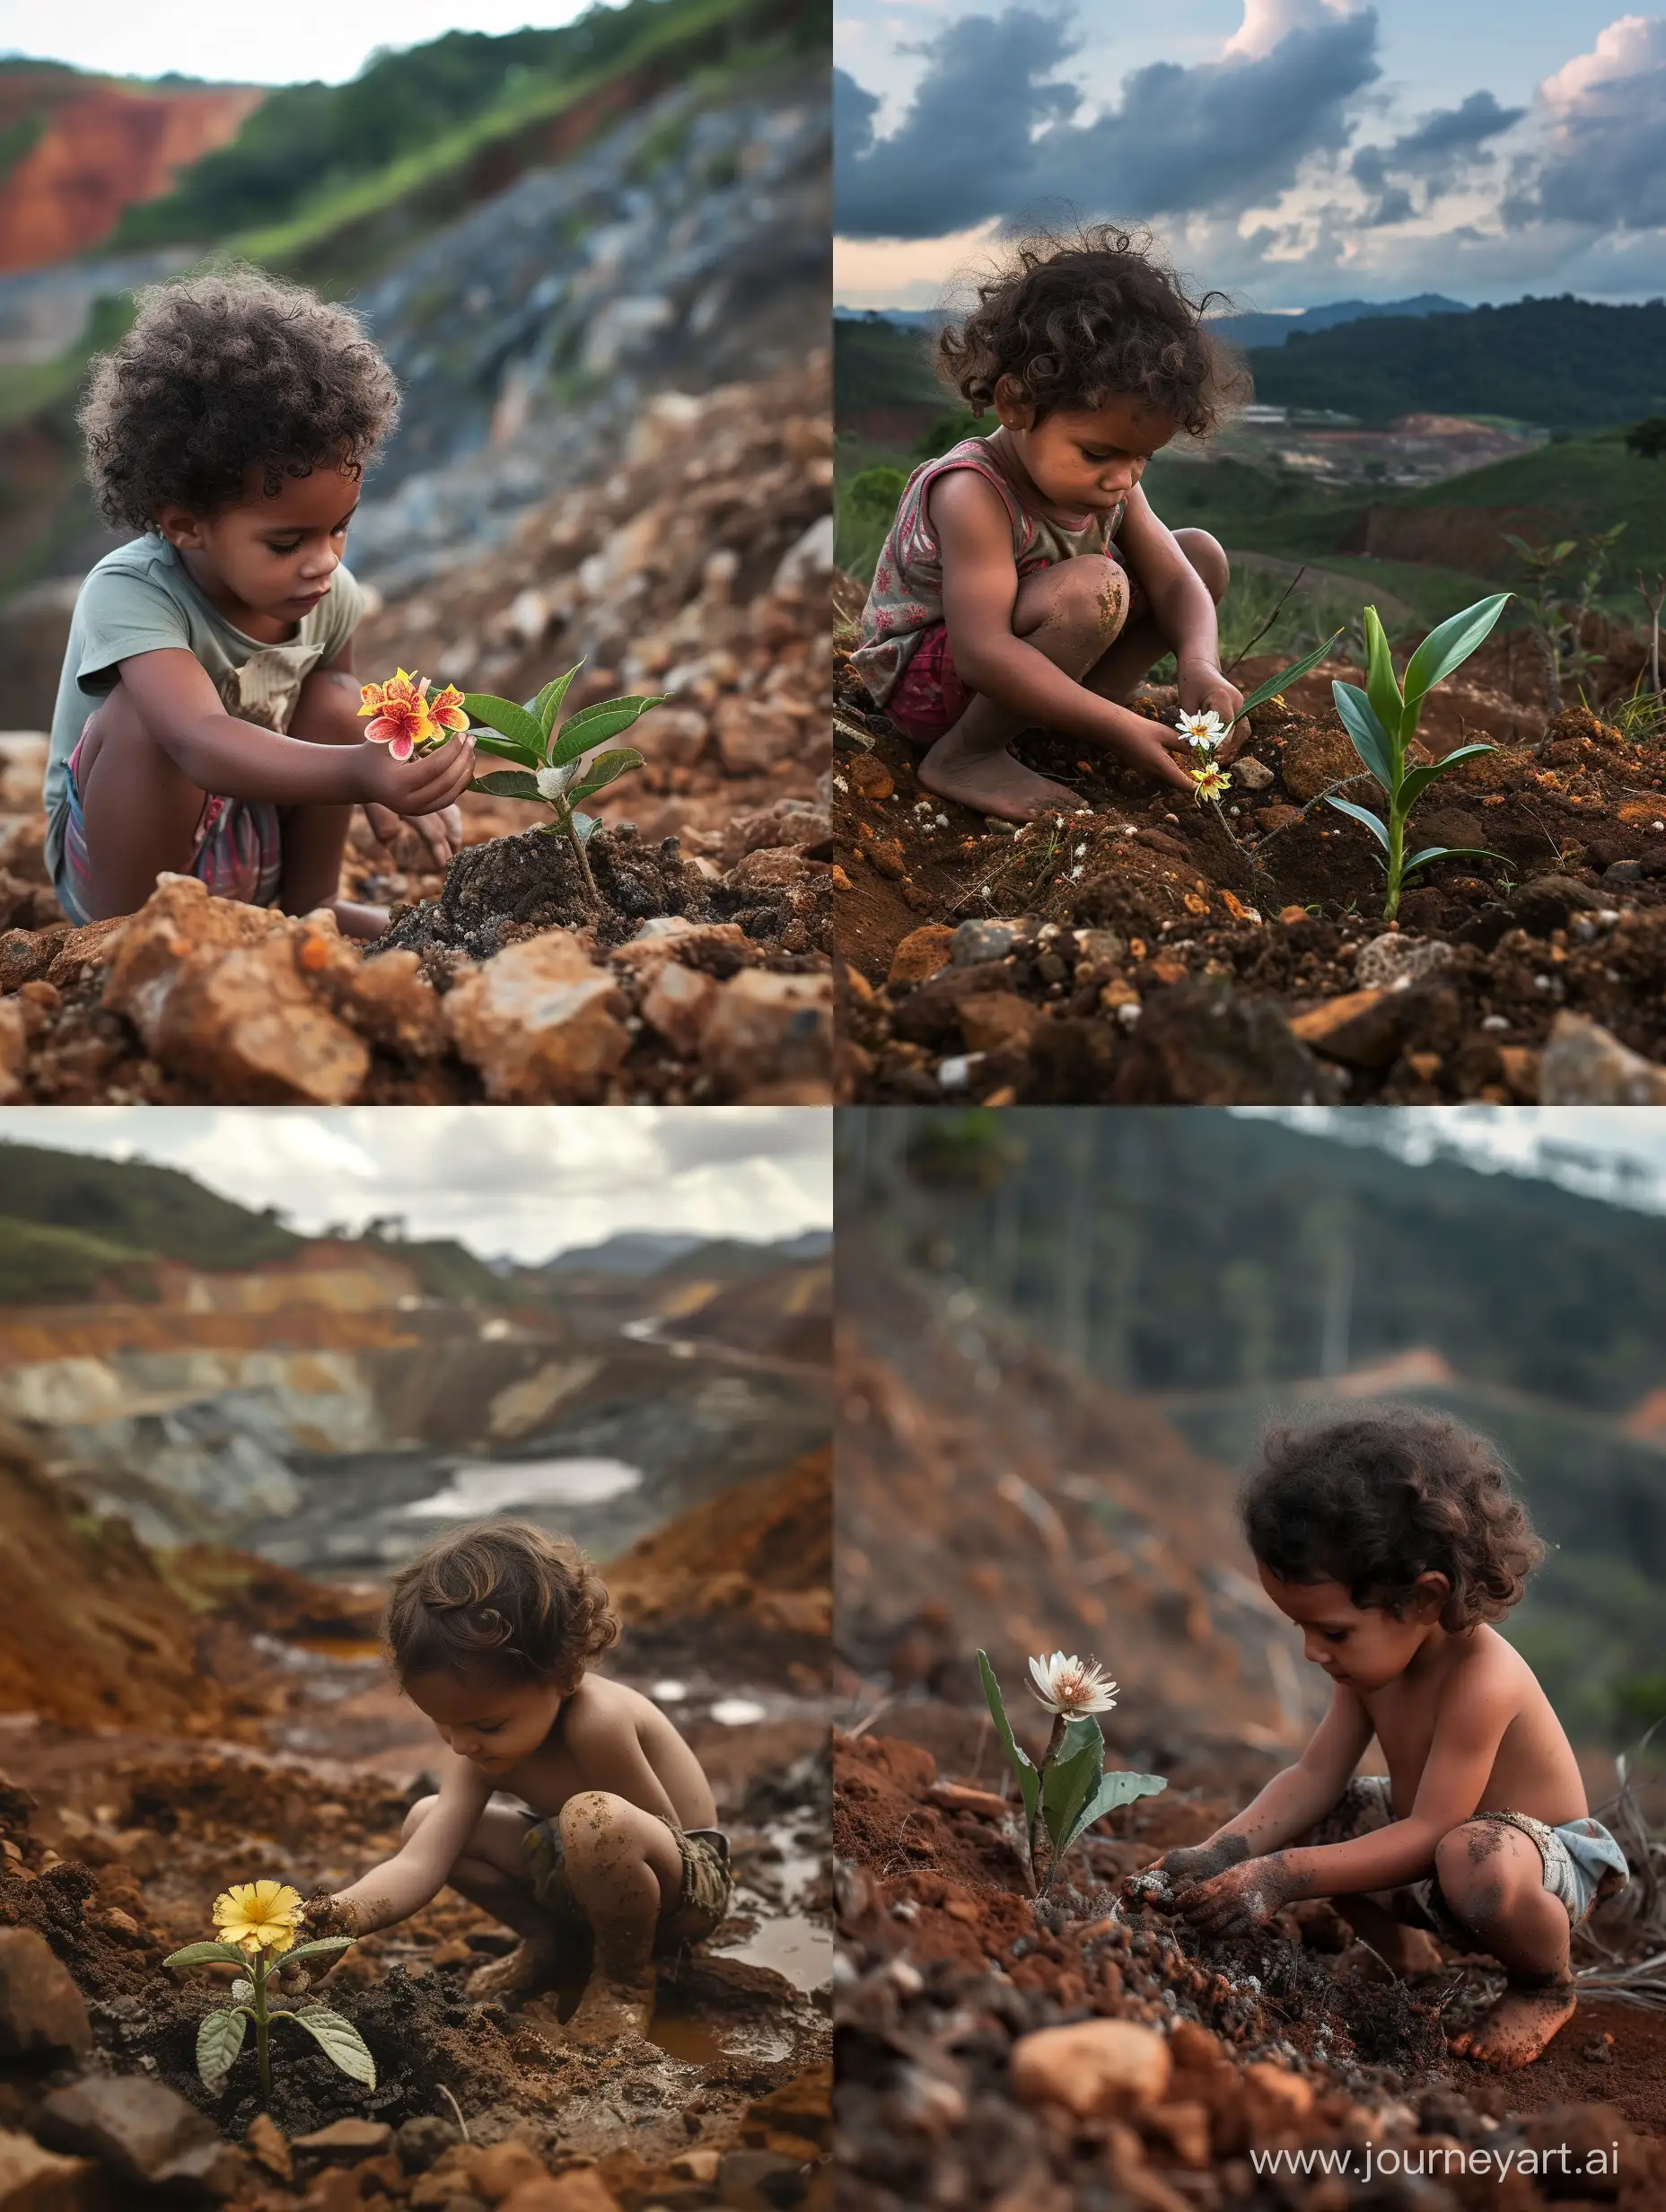 preservation in Minas Gerais contrasting with ore exploration, a child between these worlds cultivating a flower